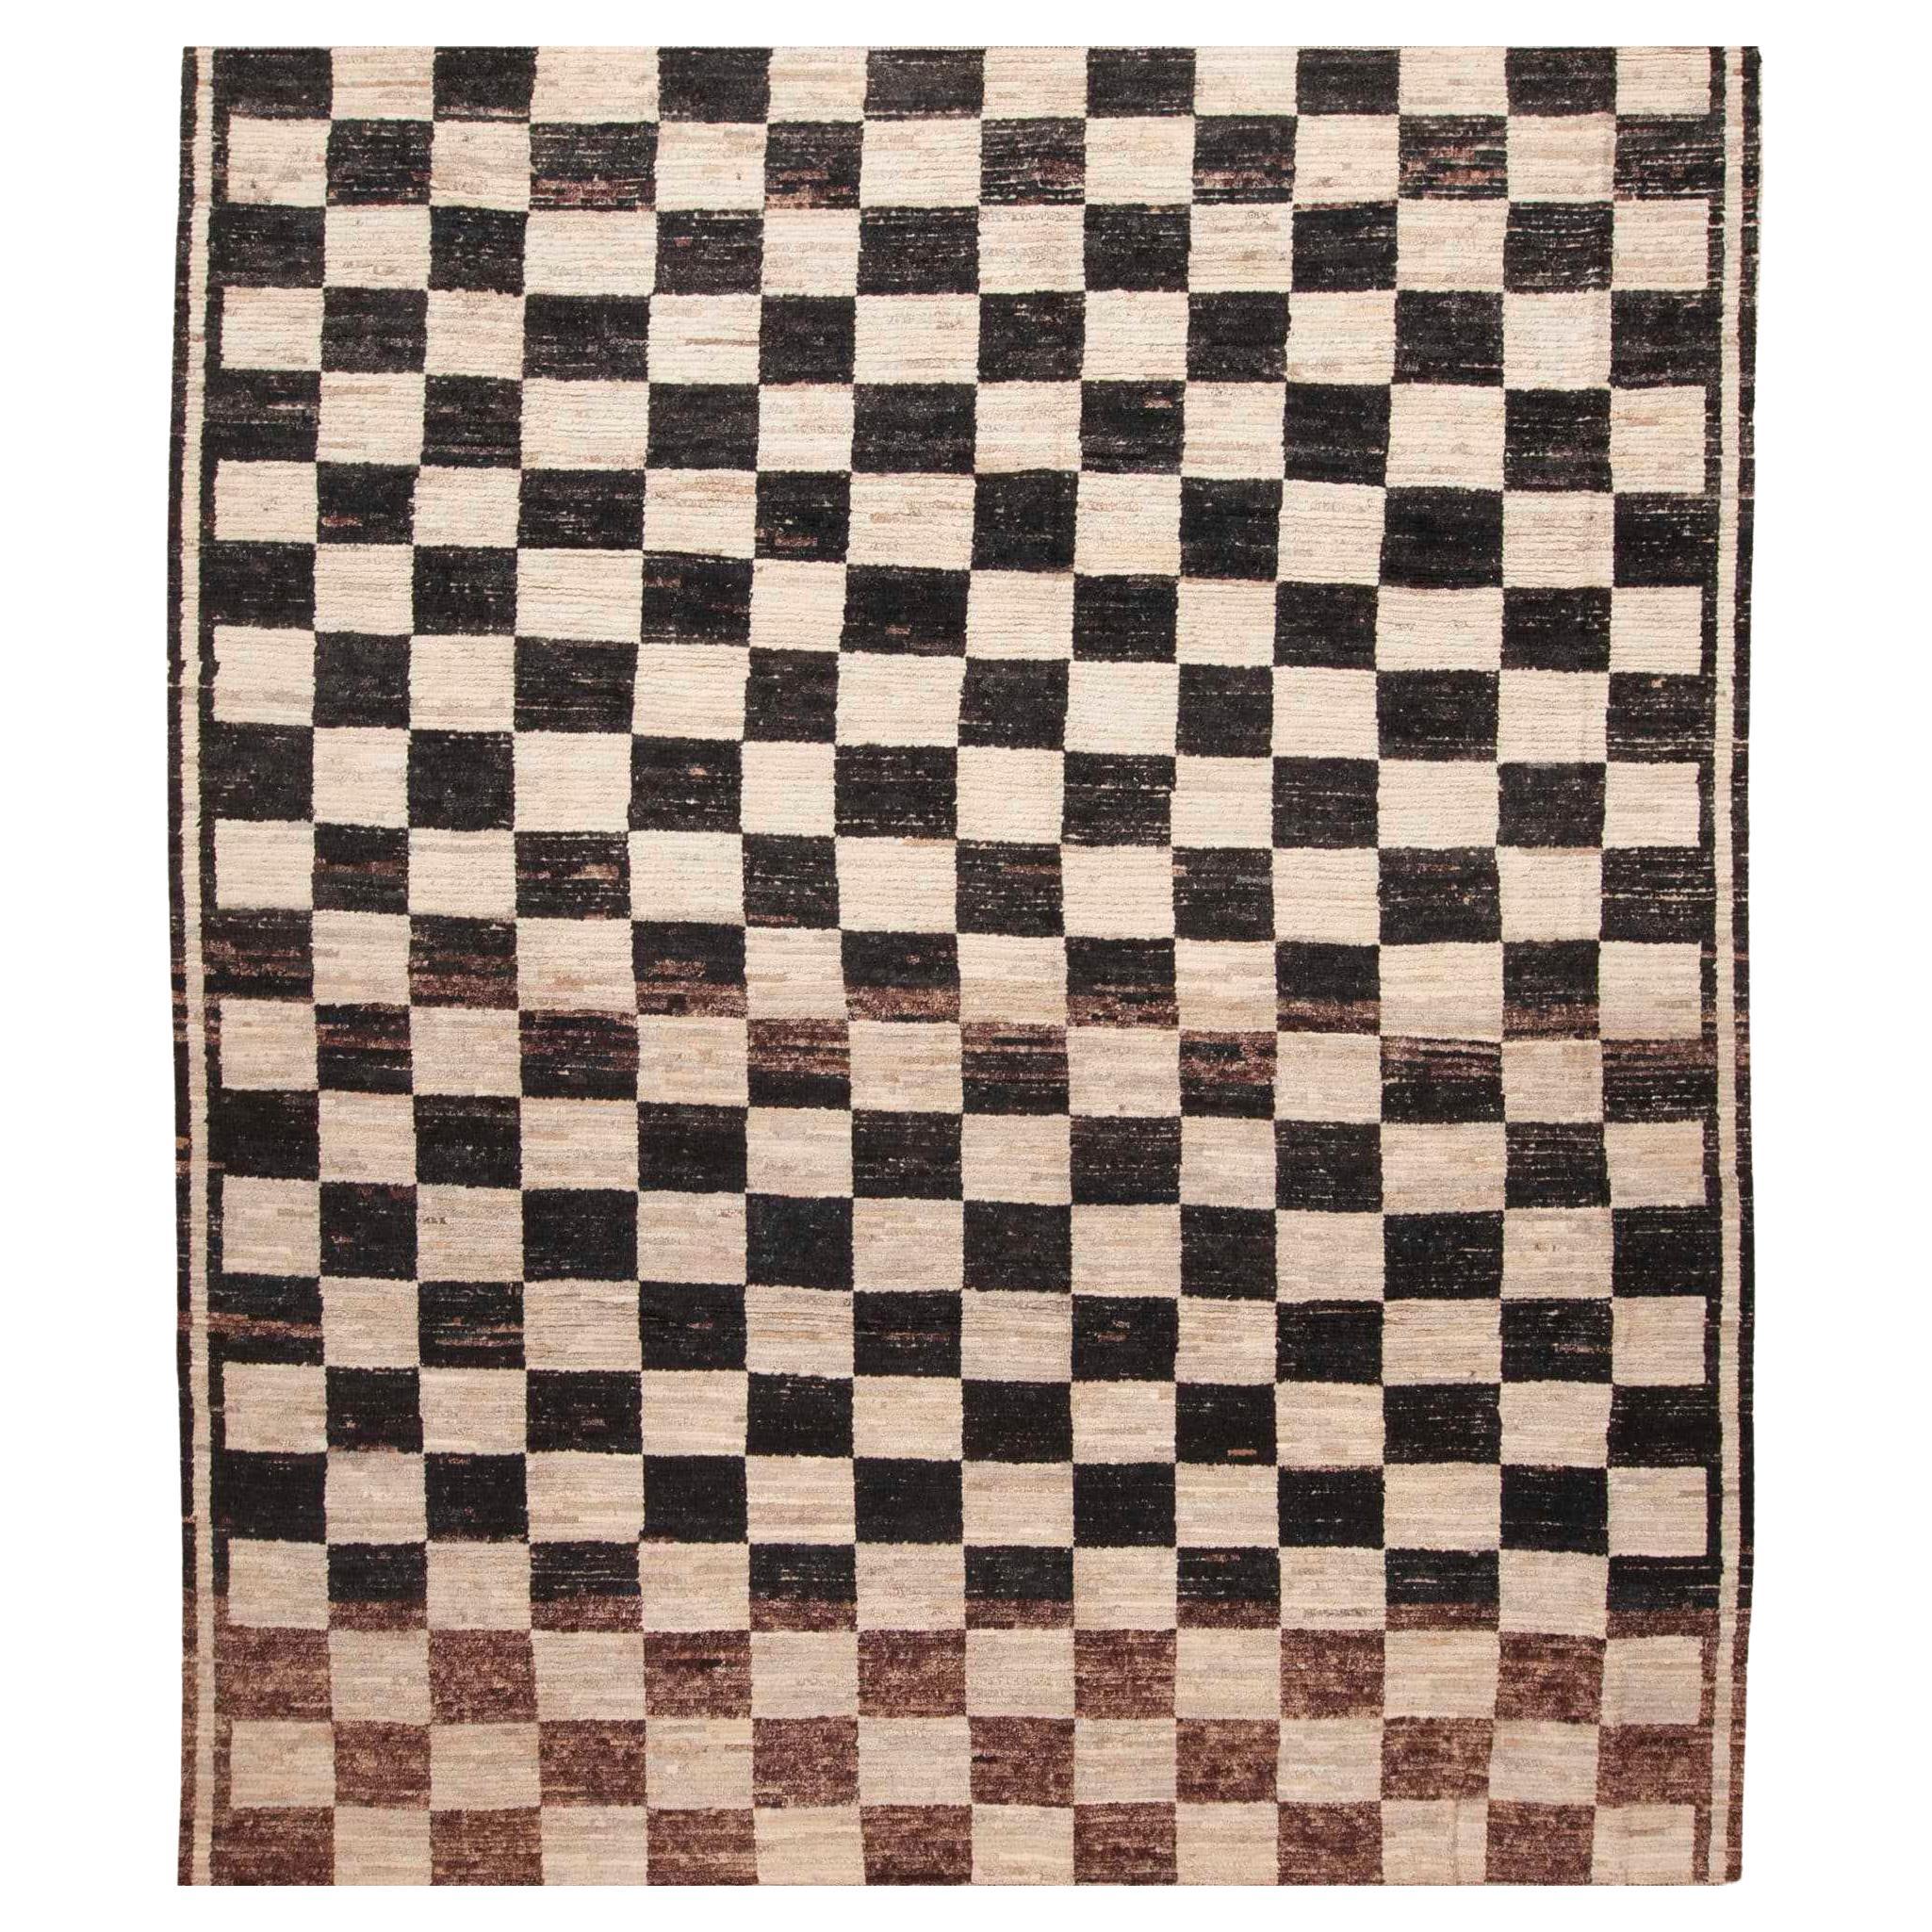 Nazmiyal Collection Tribal Geometric Checkerboard Modern Area Rug 11'7" x 12'5" For Sale